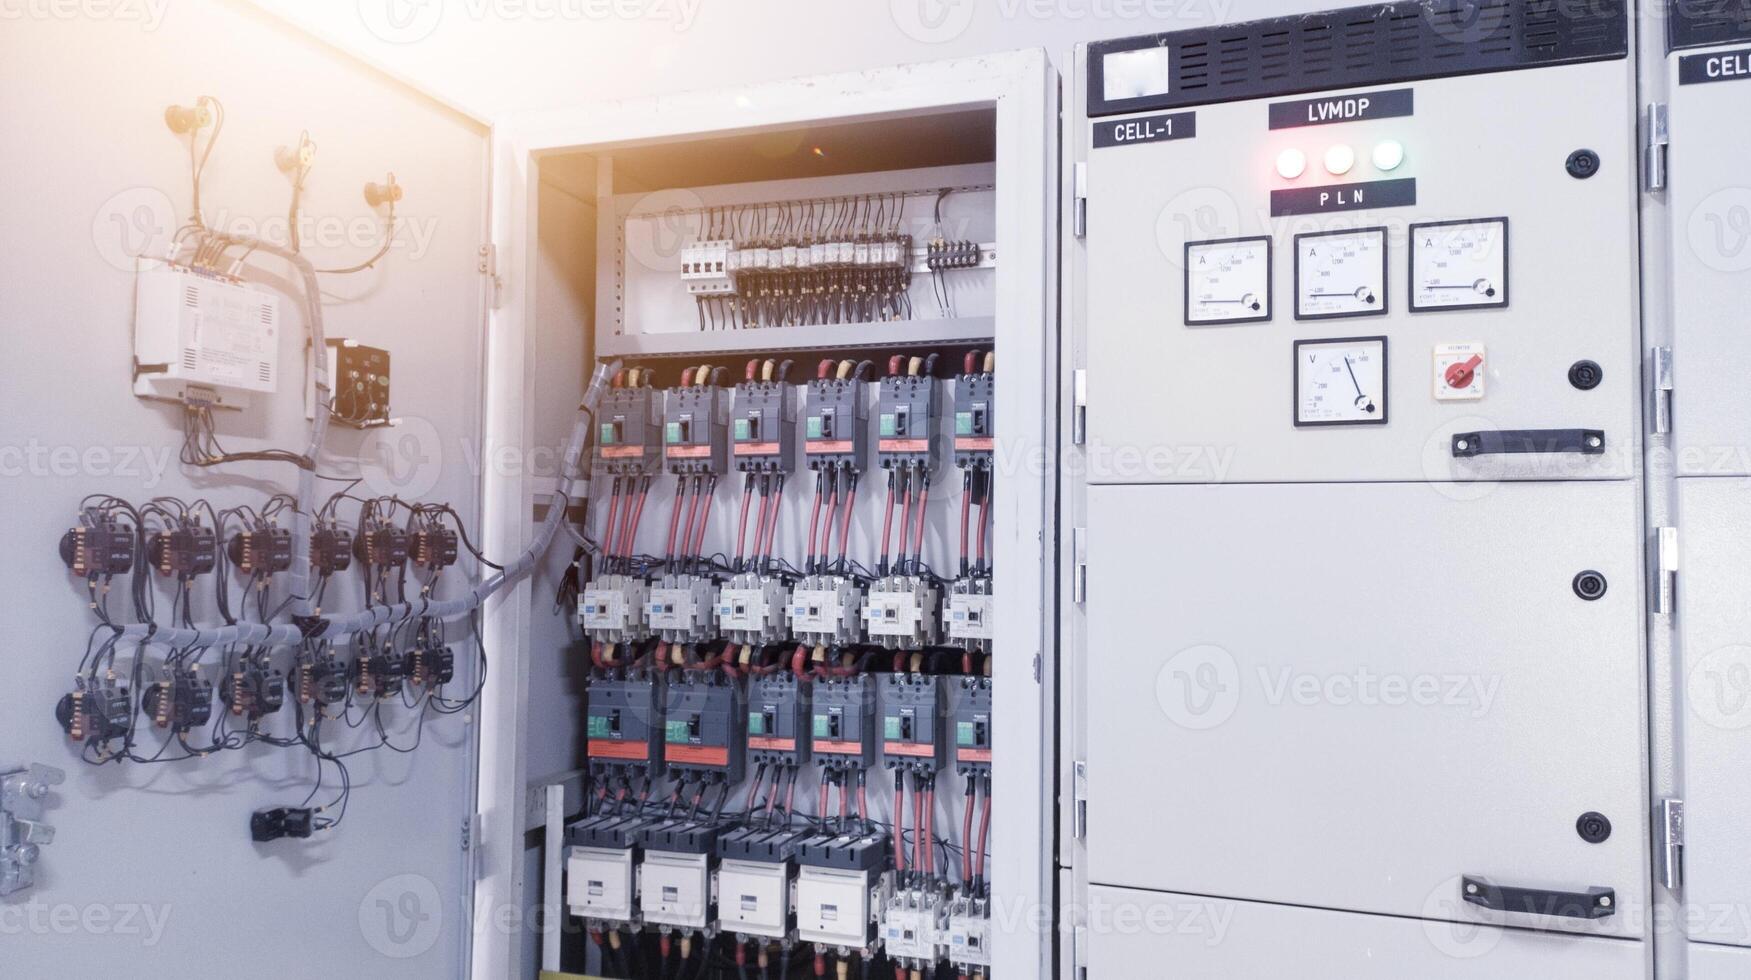 The Electrical Panel of power control main distribution in the induatrial power plant. photo